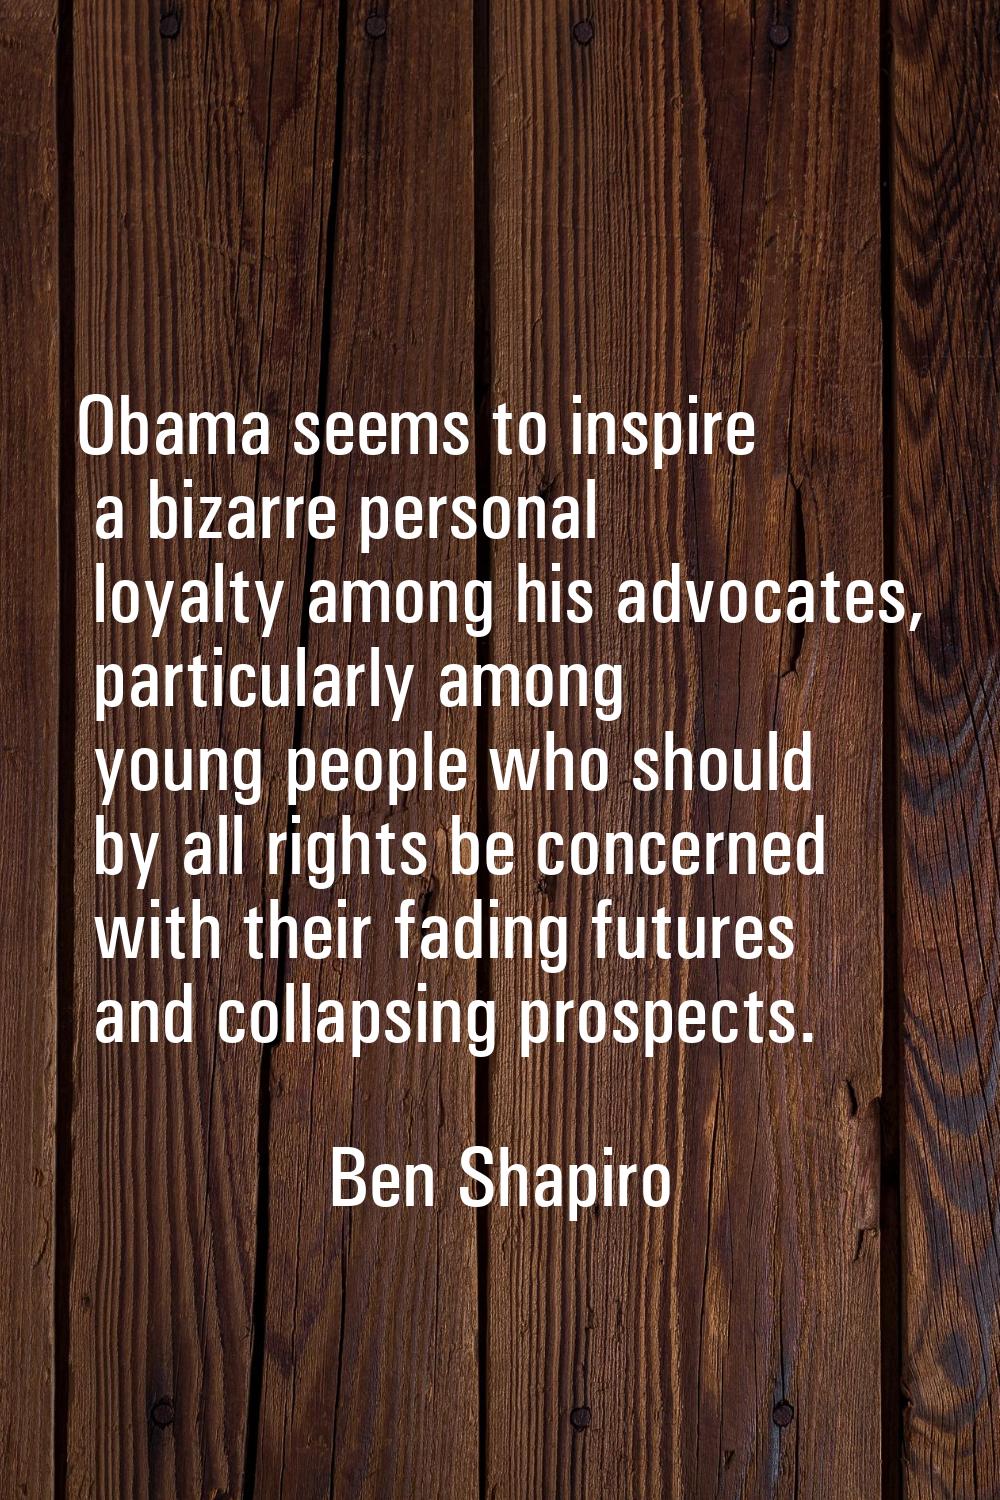 Obama seems to inspire a bizarre personal loyalty among his advocates, particularly among young peo